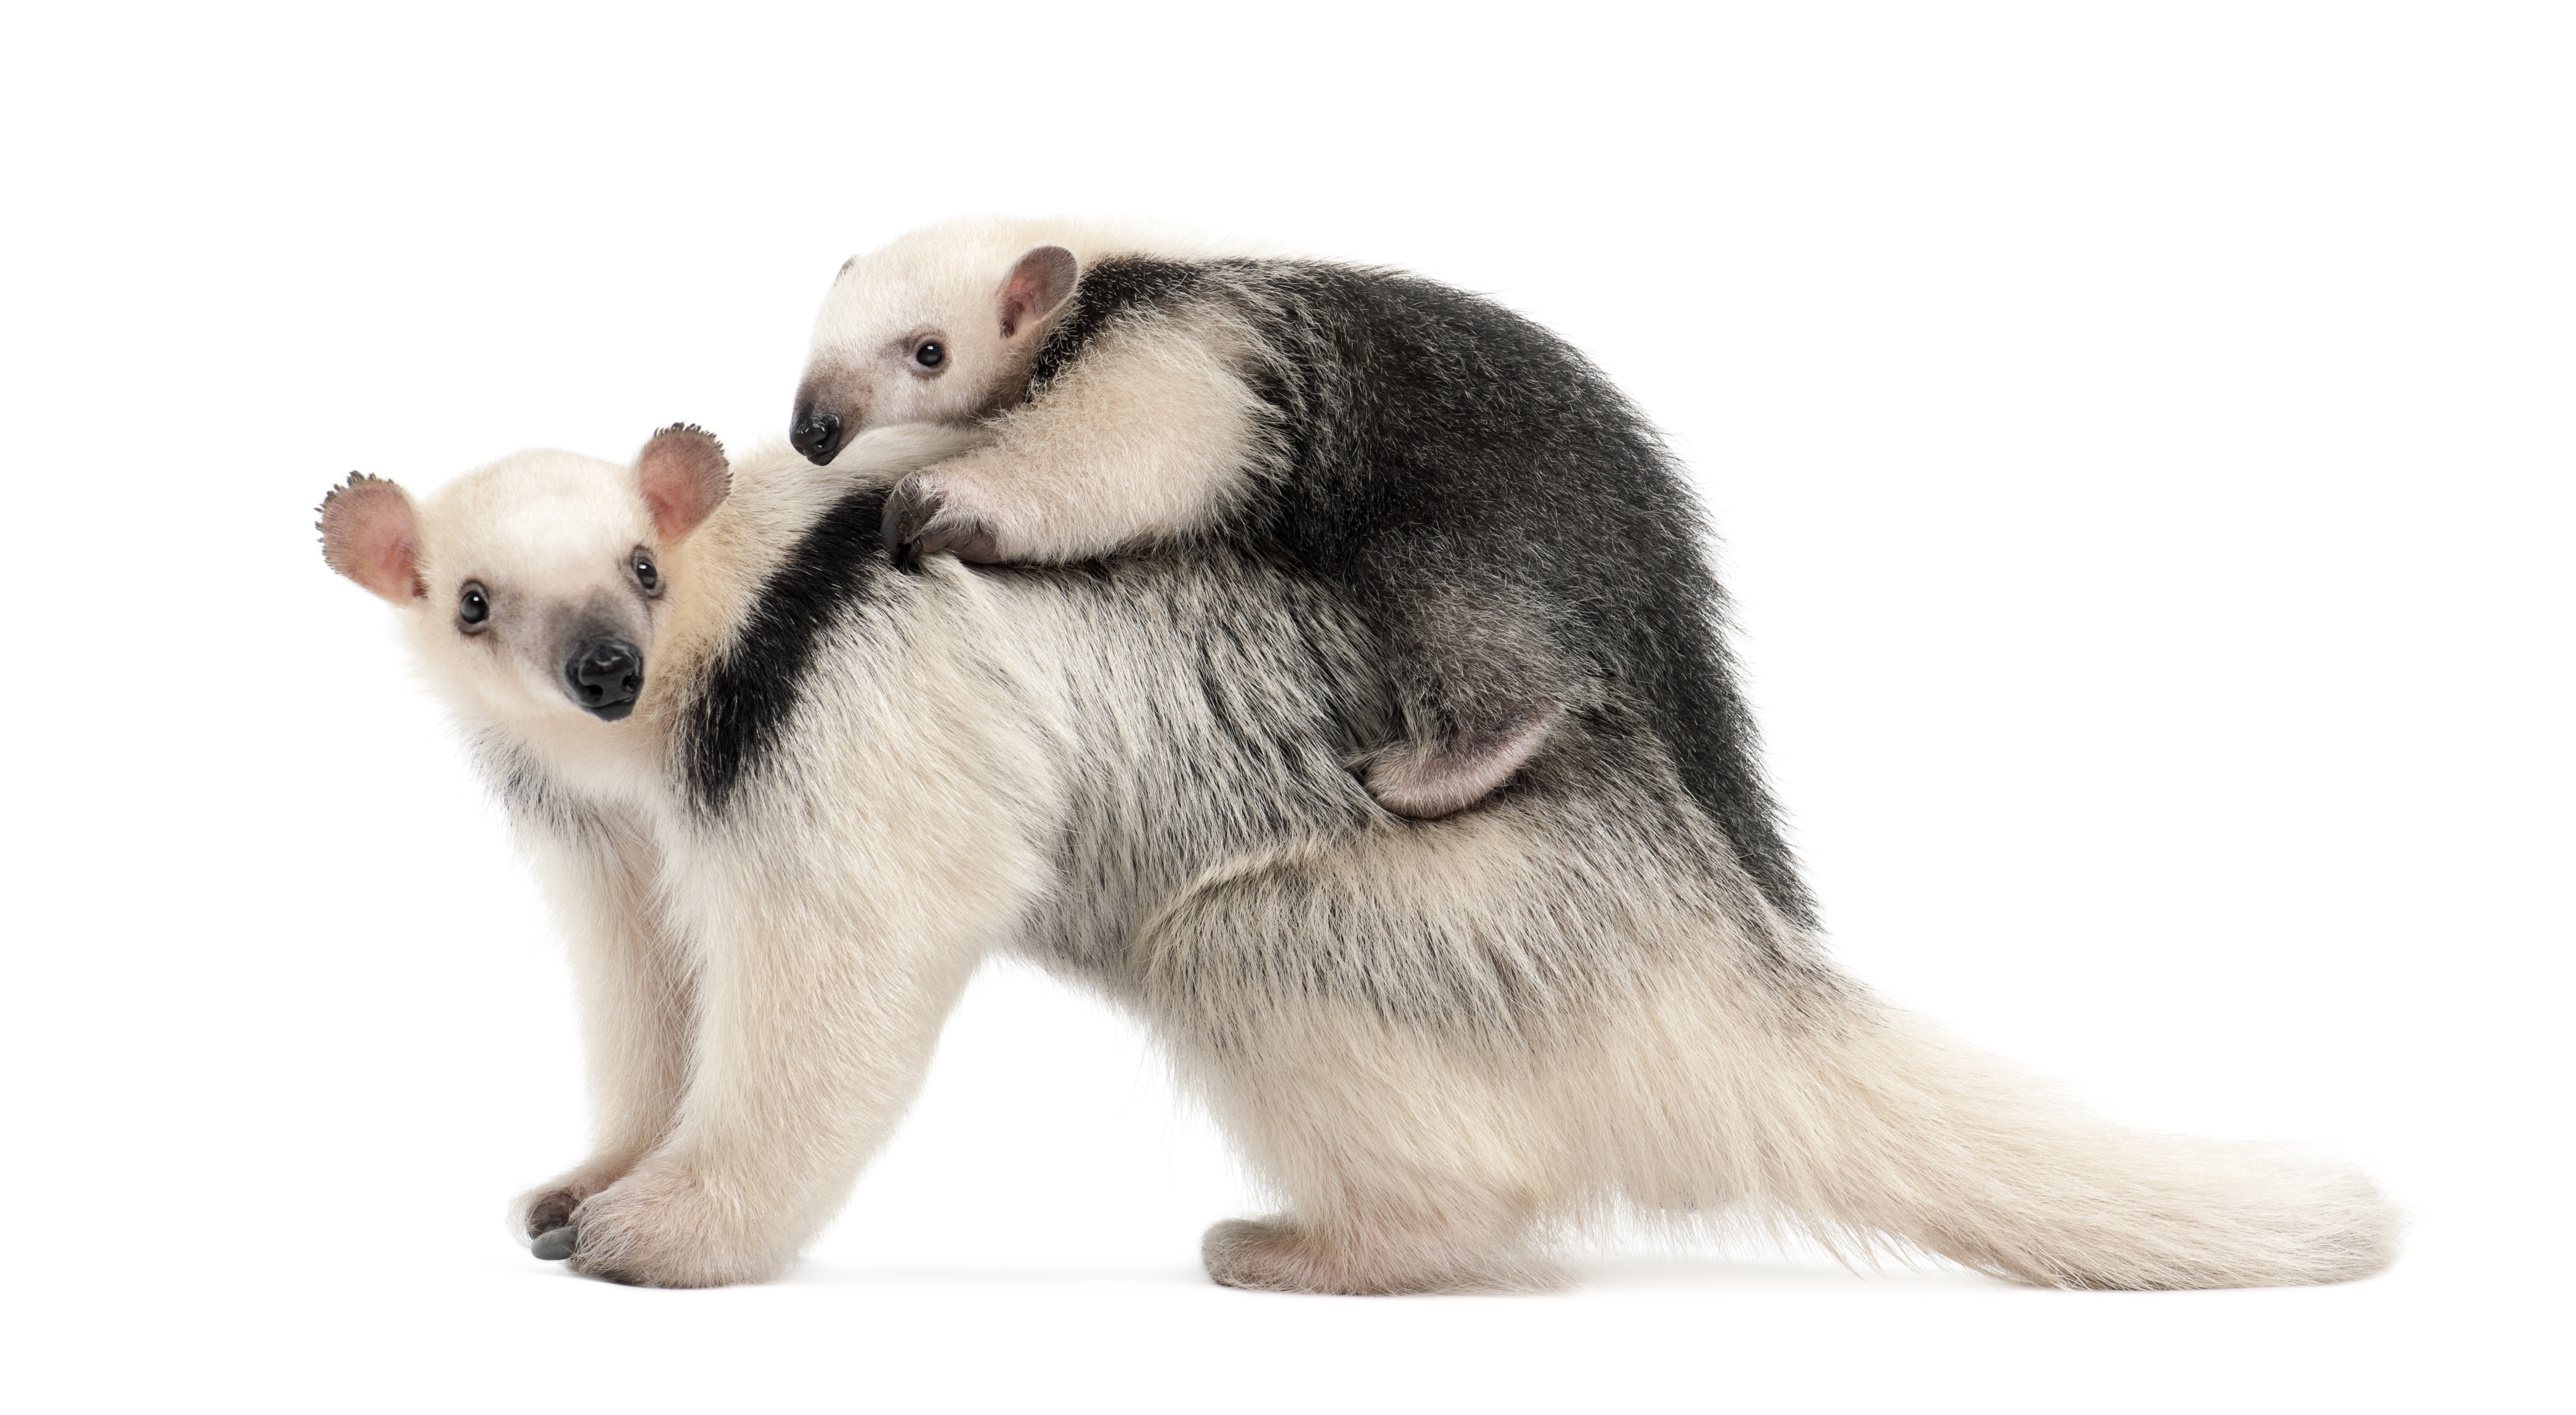 A lesser anteater and its young (GlobalP/iStock)